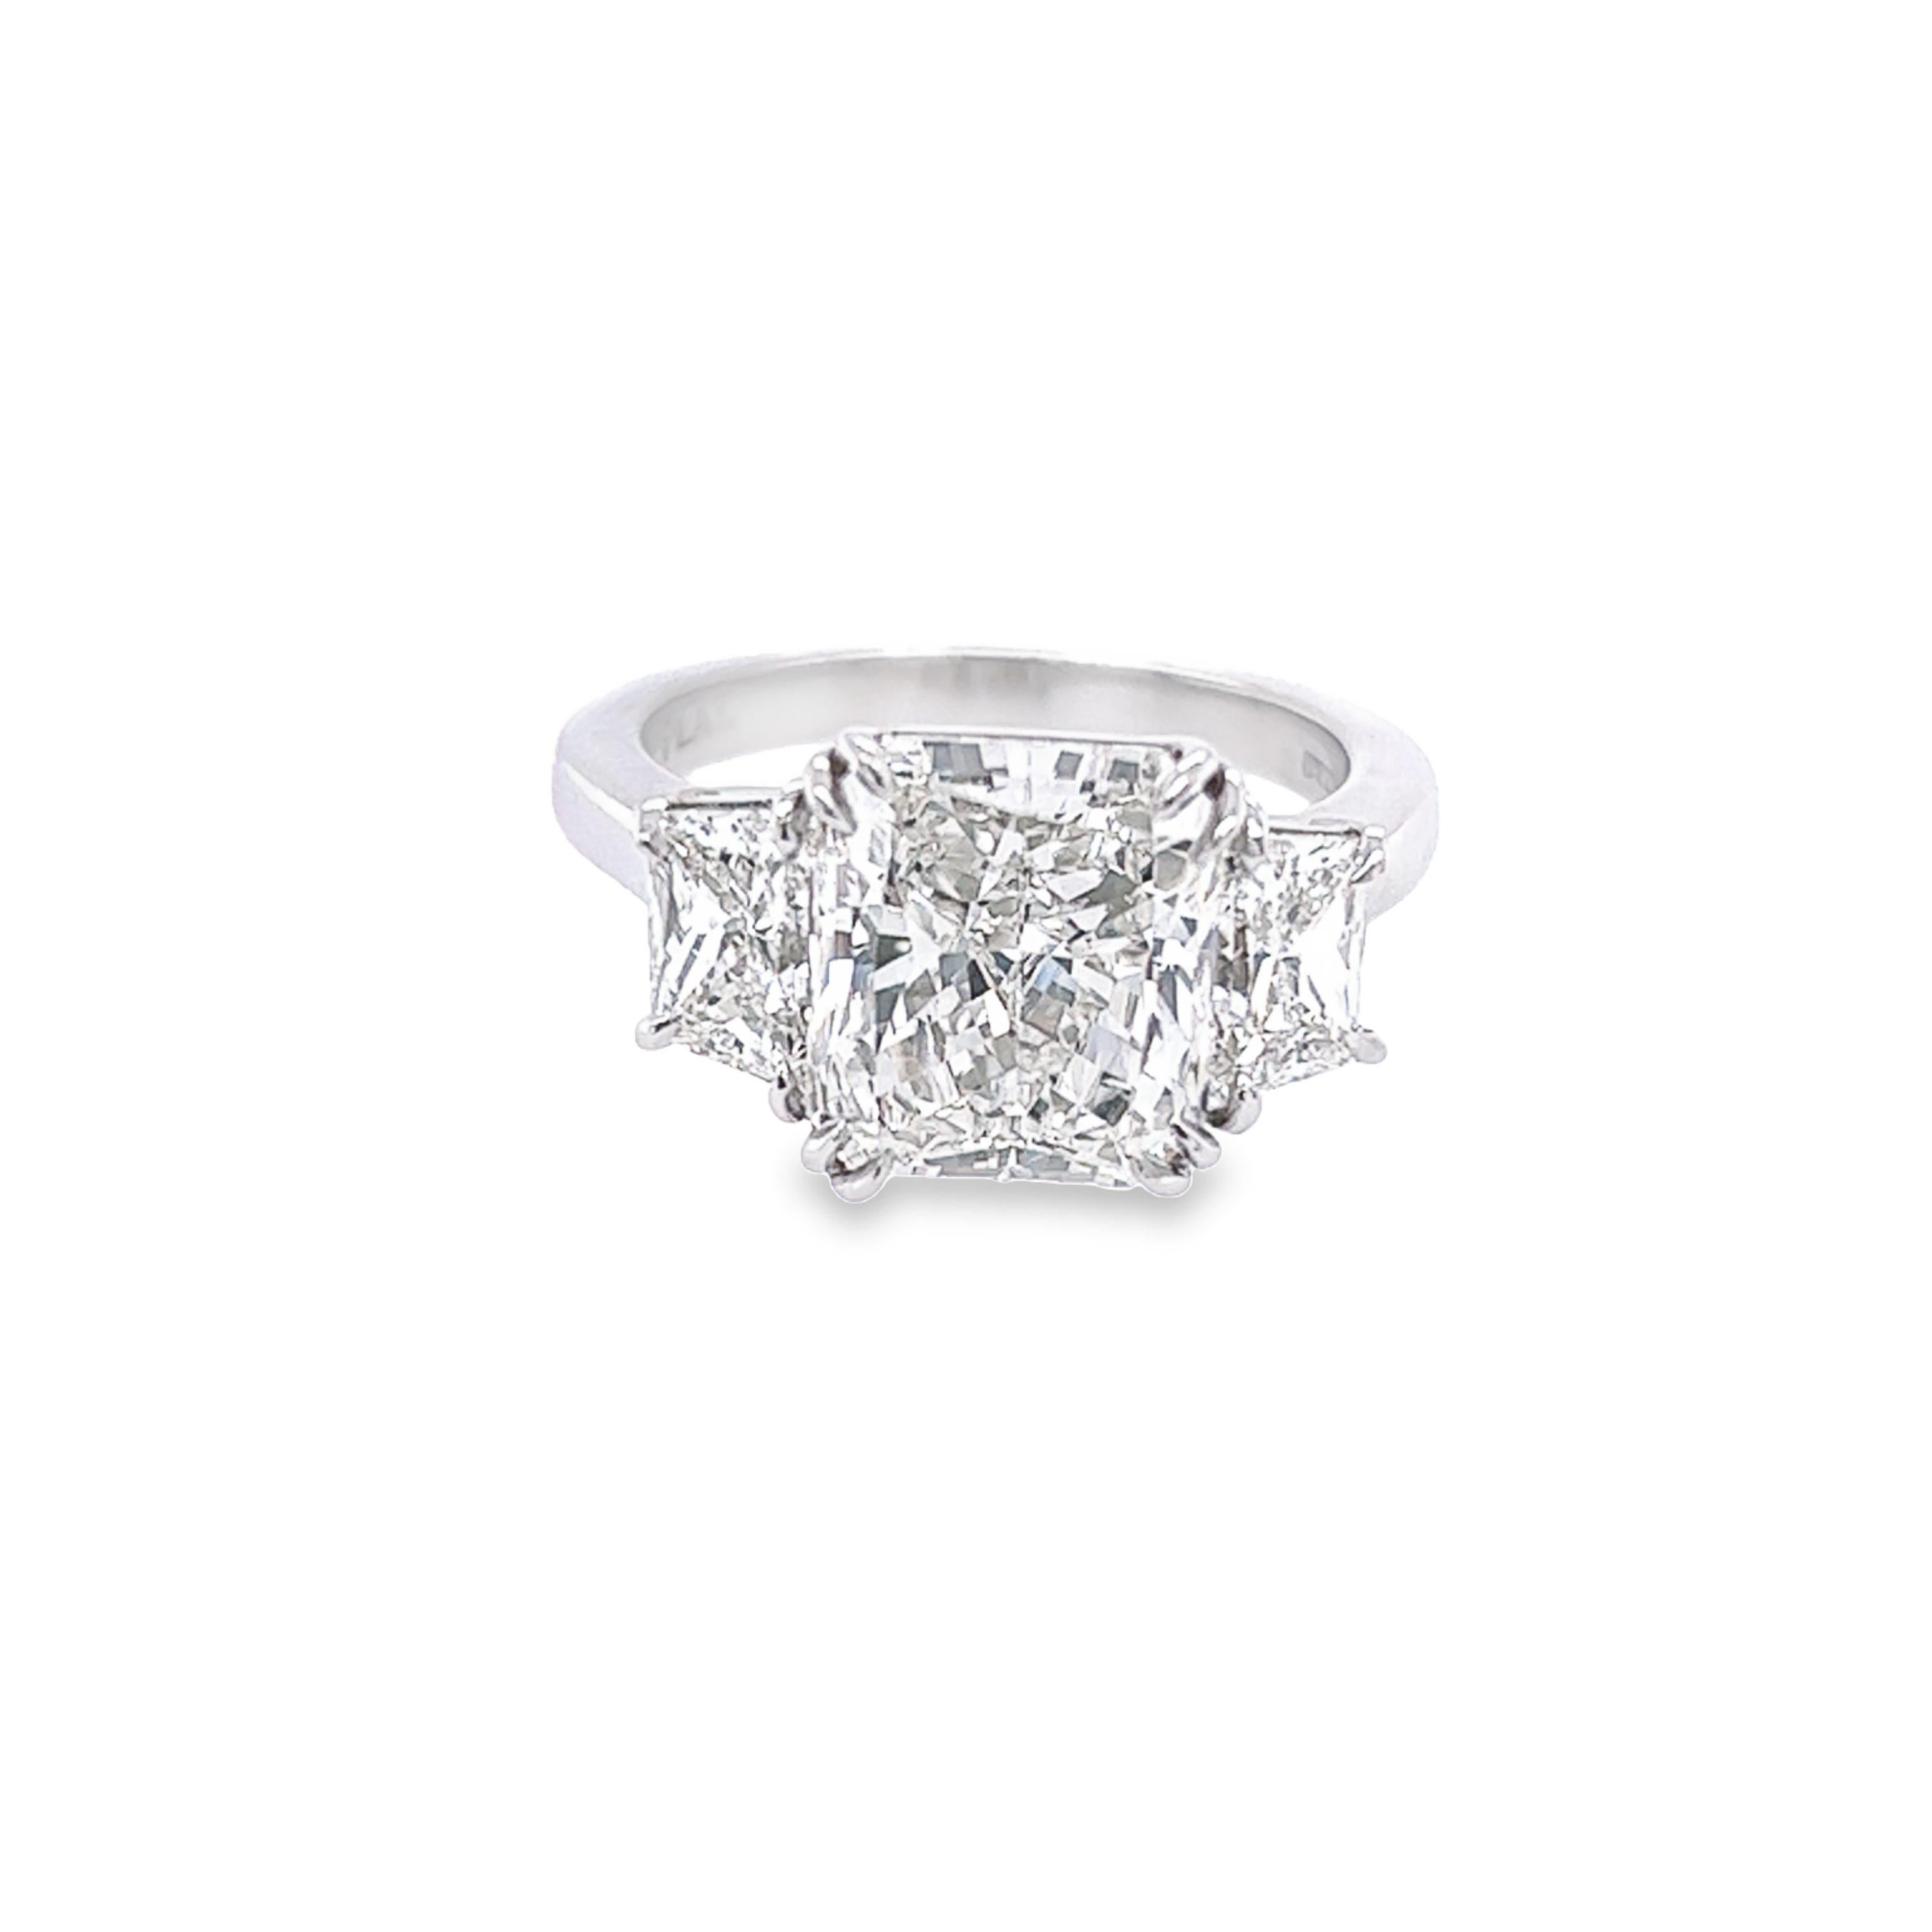 Rosenberg Diamonds 4.34 carat Radiant cut G color VS2 clarity is accompanied by a GIA certificate. This beautiful three-stone Radiant is full of brilliance and it is set in a handmade platinum setting with perfectly matched pair of trapezoid diamond